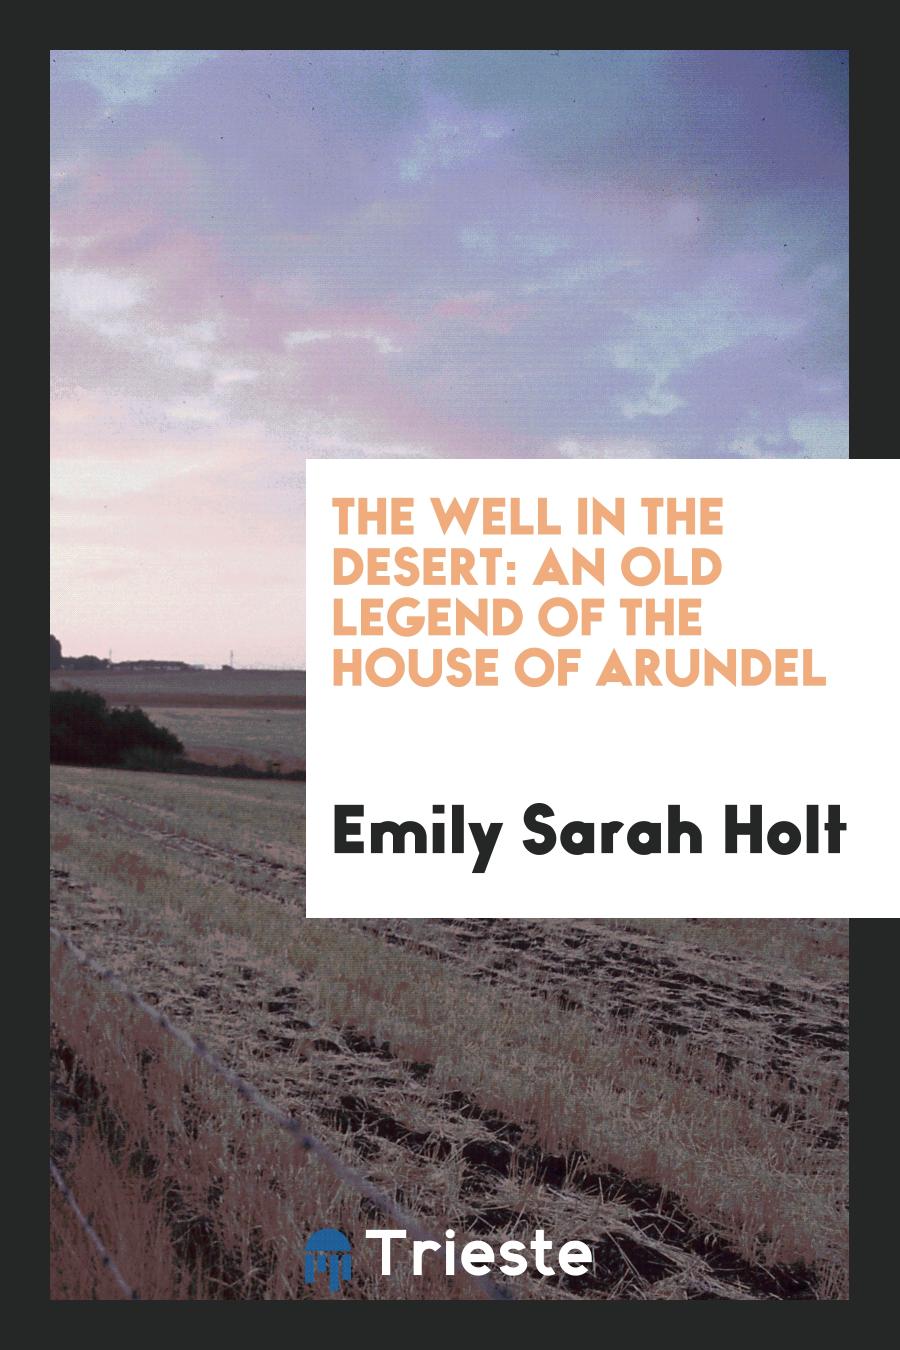 The Well in the Desert: An Old Legend of the House of Arundel